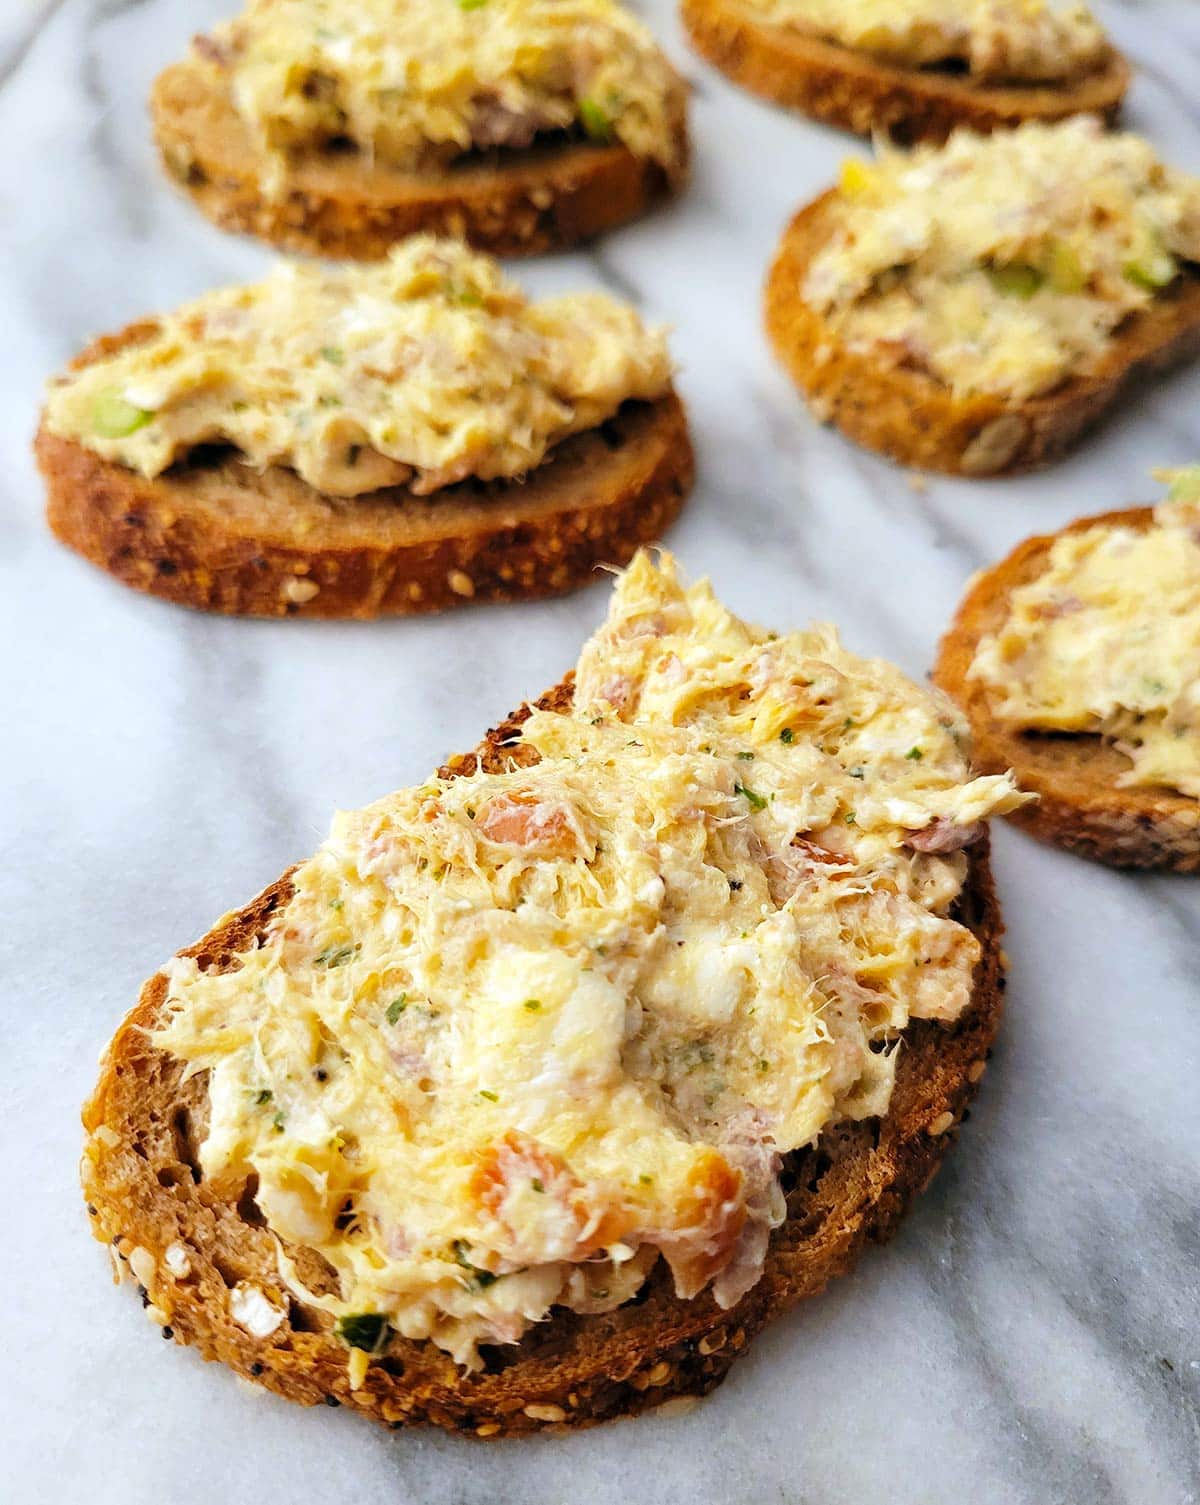 Smoked trout dip on bread